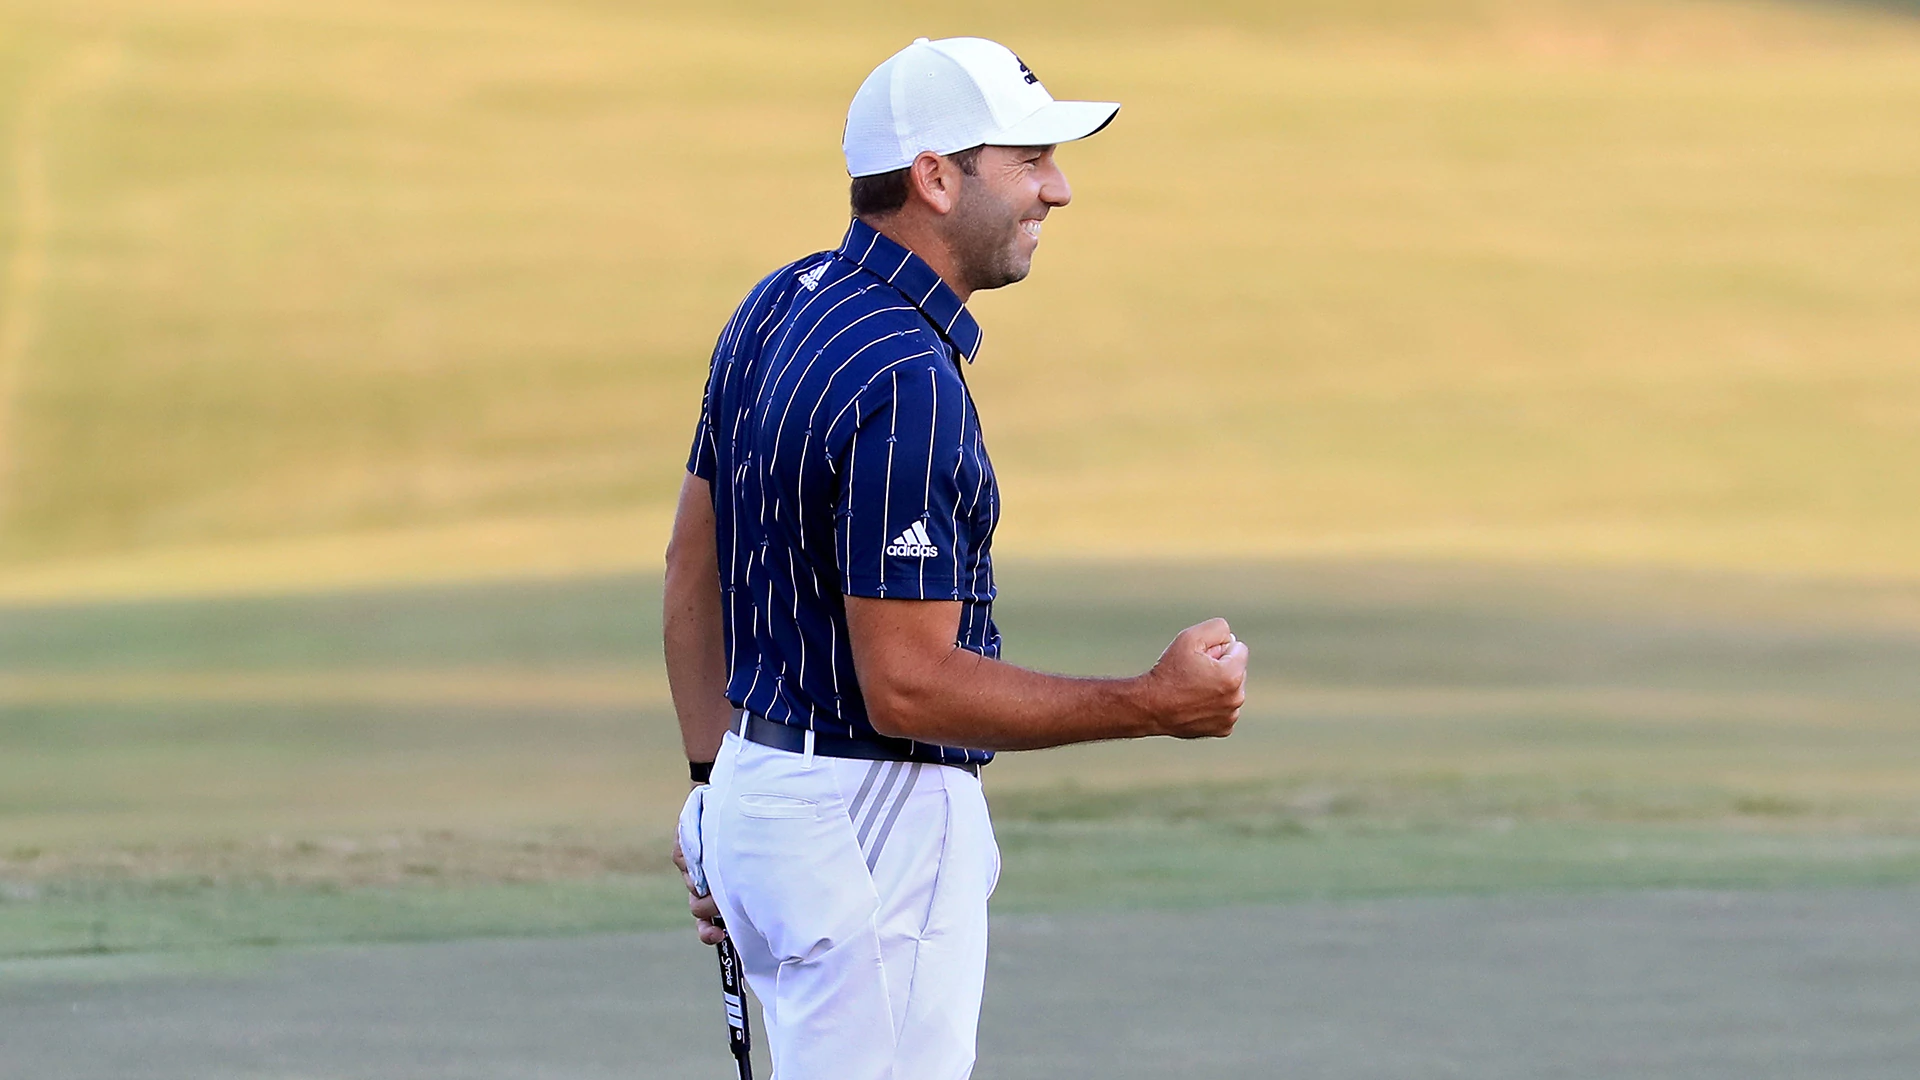 Final birdie gives Sergio Garcia Sanderson Farms title, first Tour win since 2017